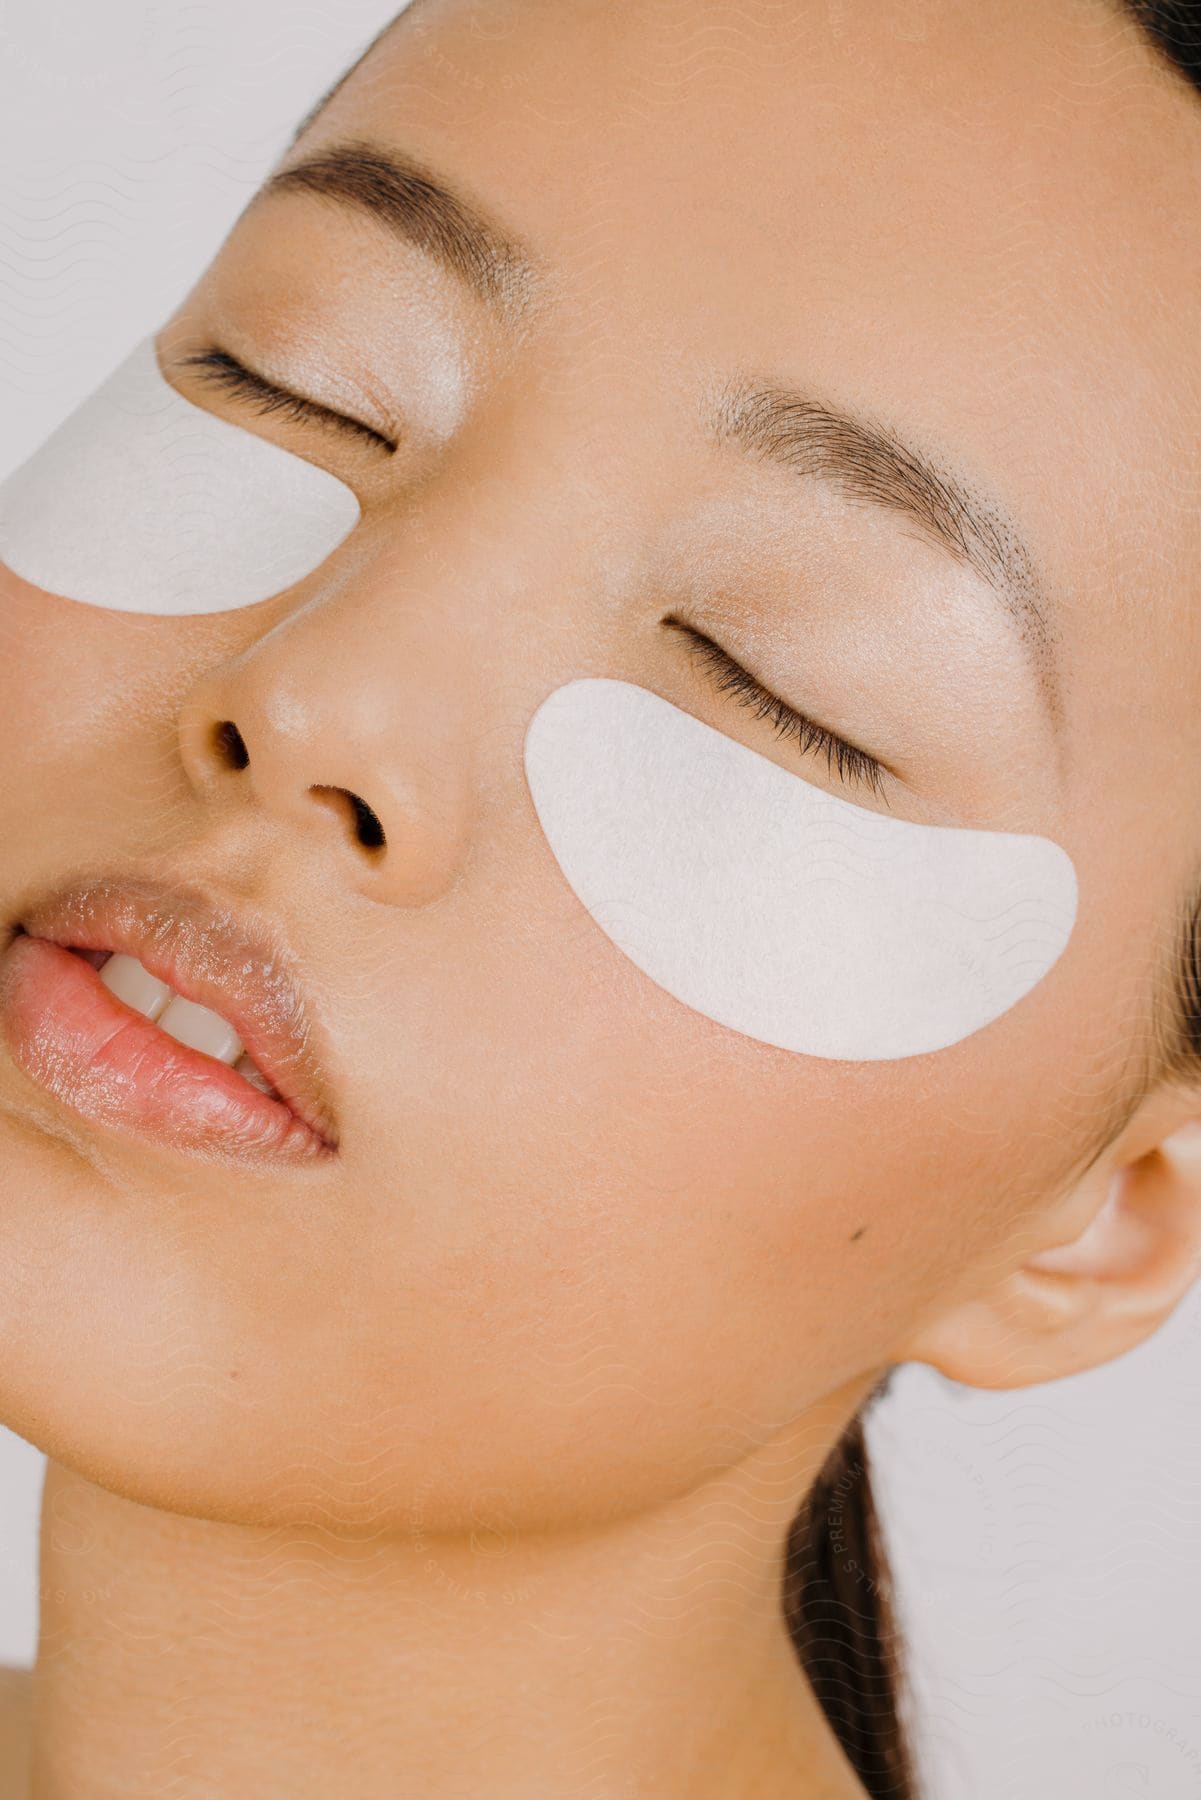 An Asian woman woman with eyes closed and skin treatment strips on her cheeks.